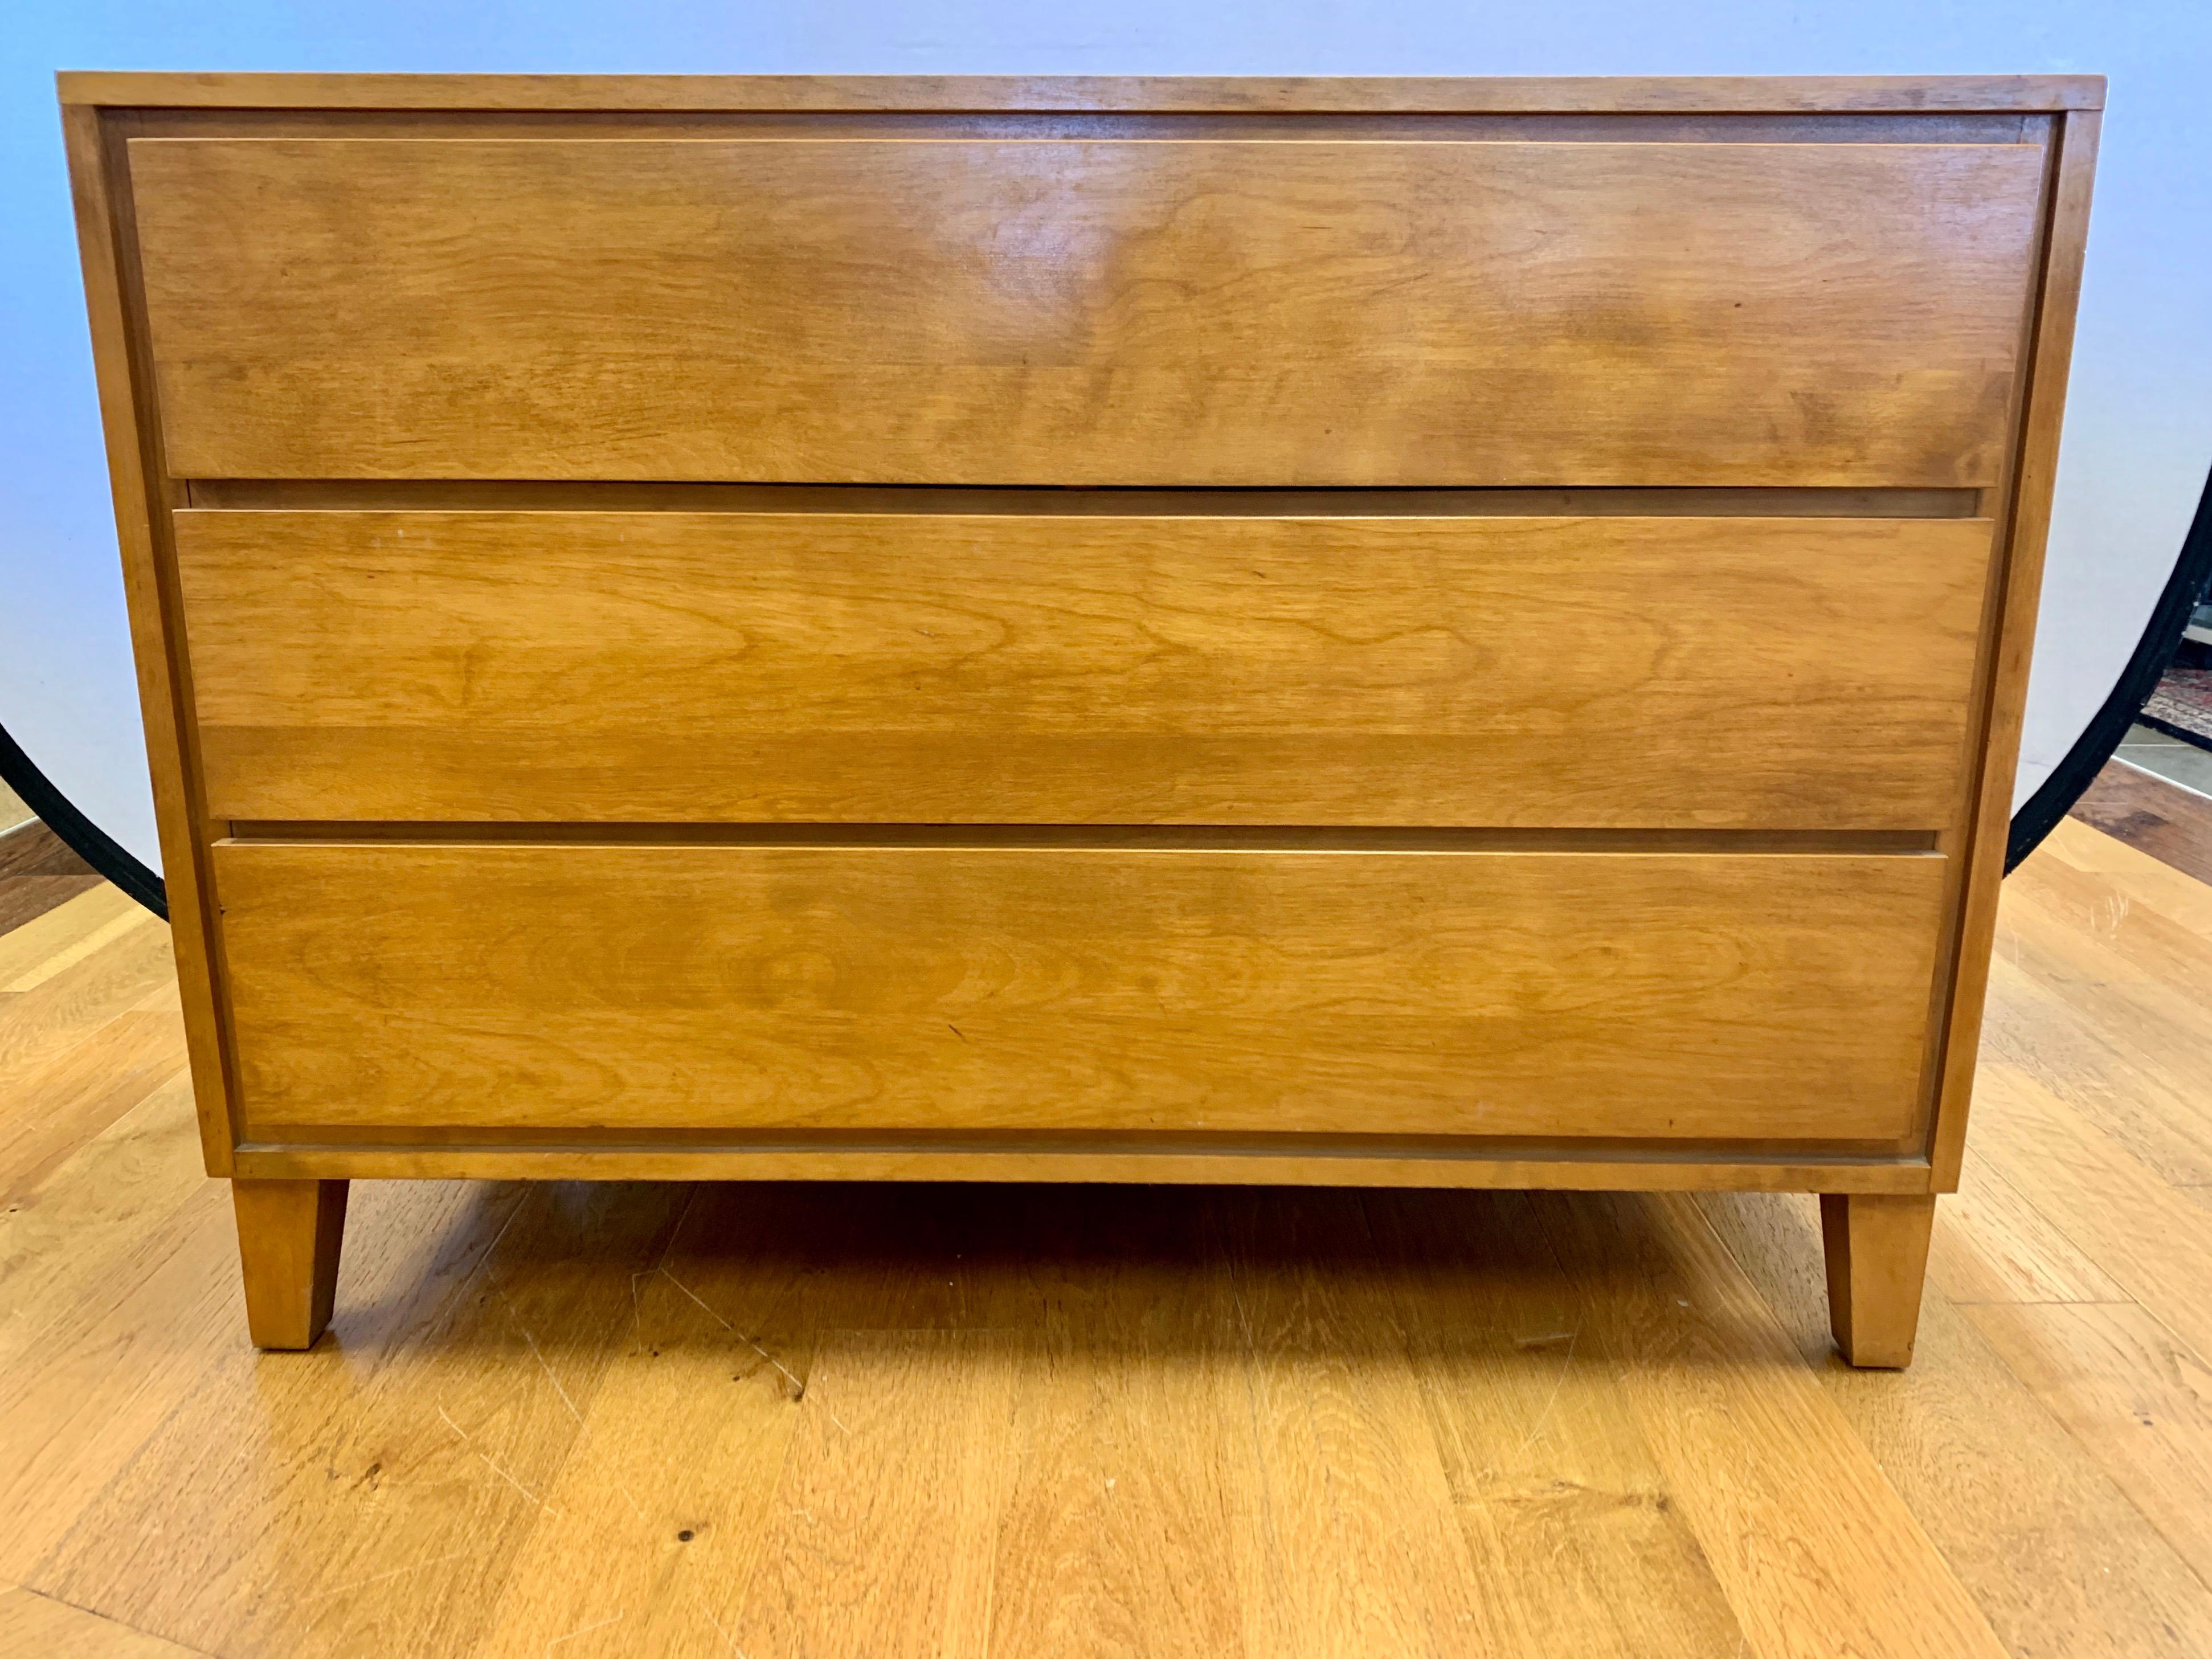 Signed Conant Ball Leslie Diamond modern mates three-drawer dresser. Great scale and better
lines. Drawers open and close with ease.